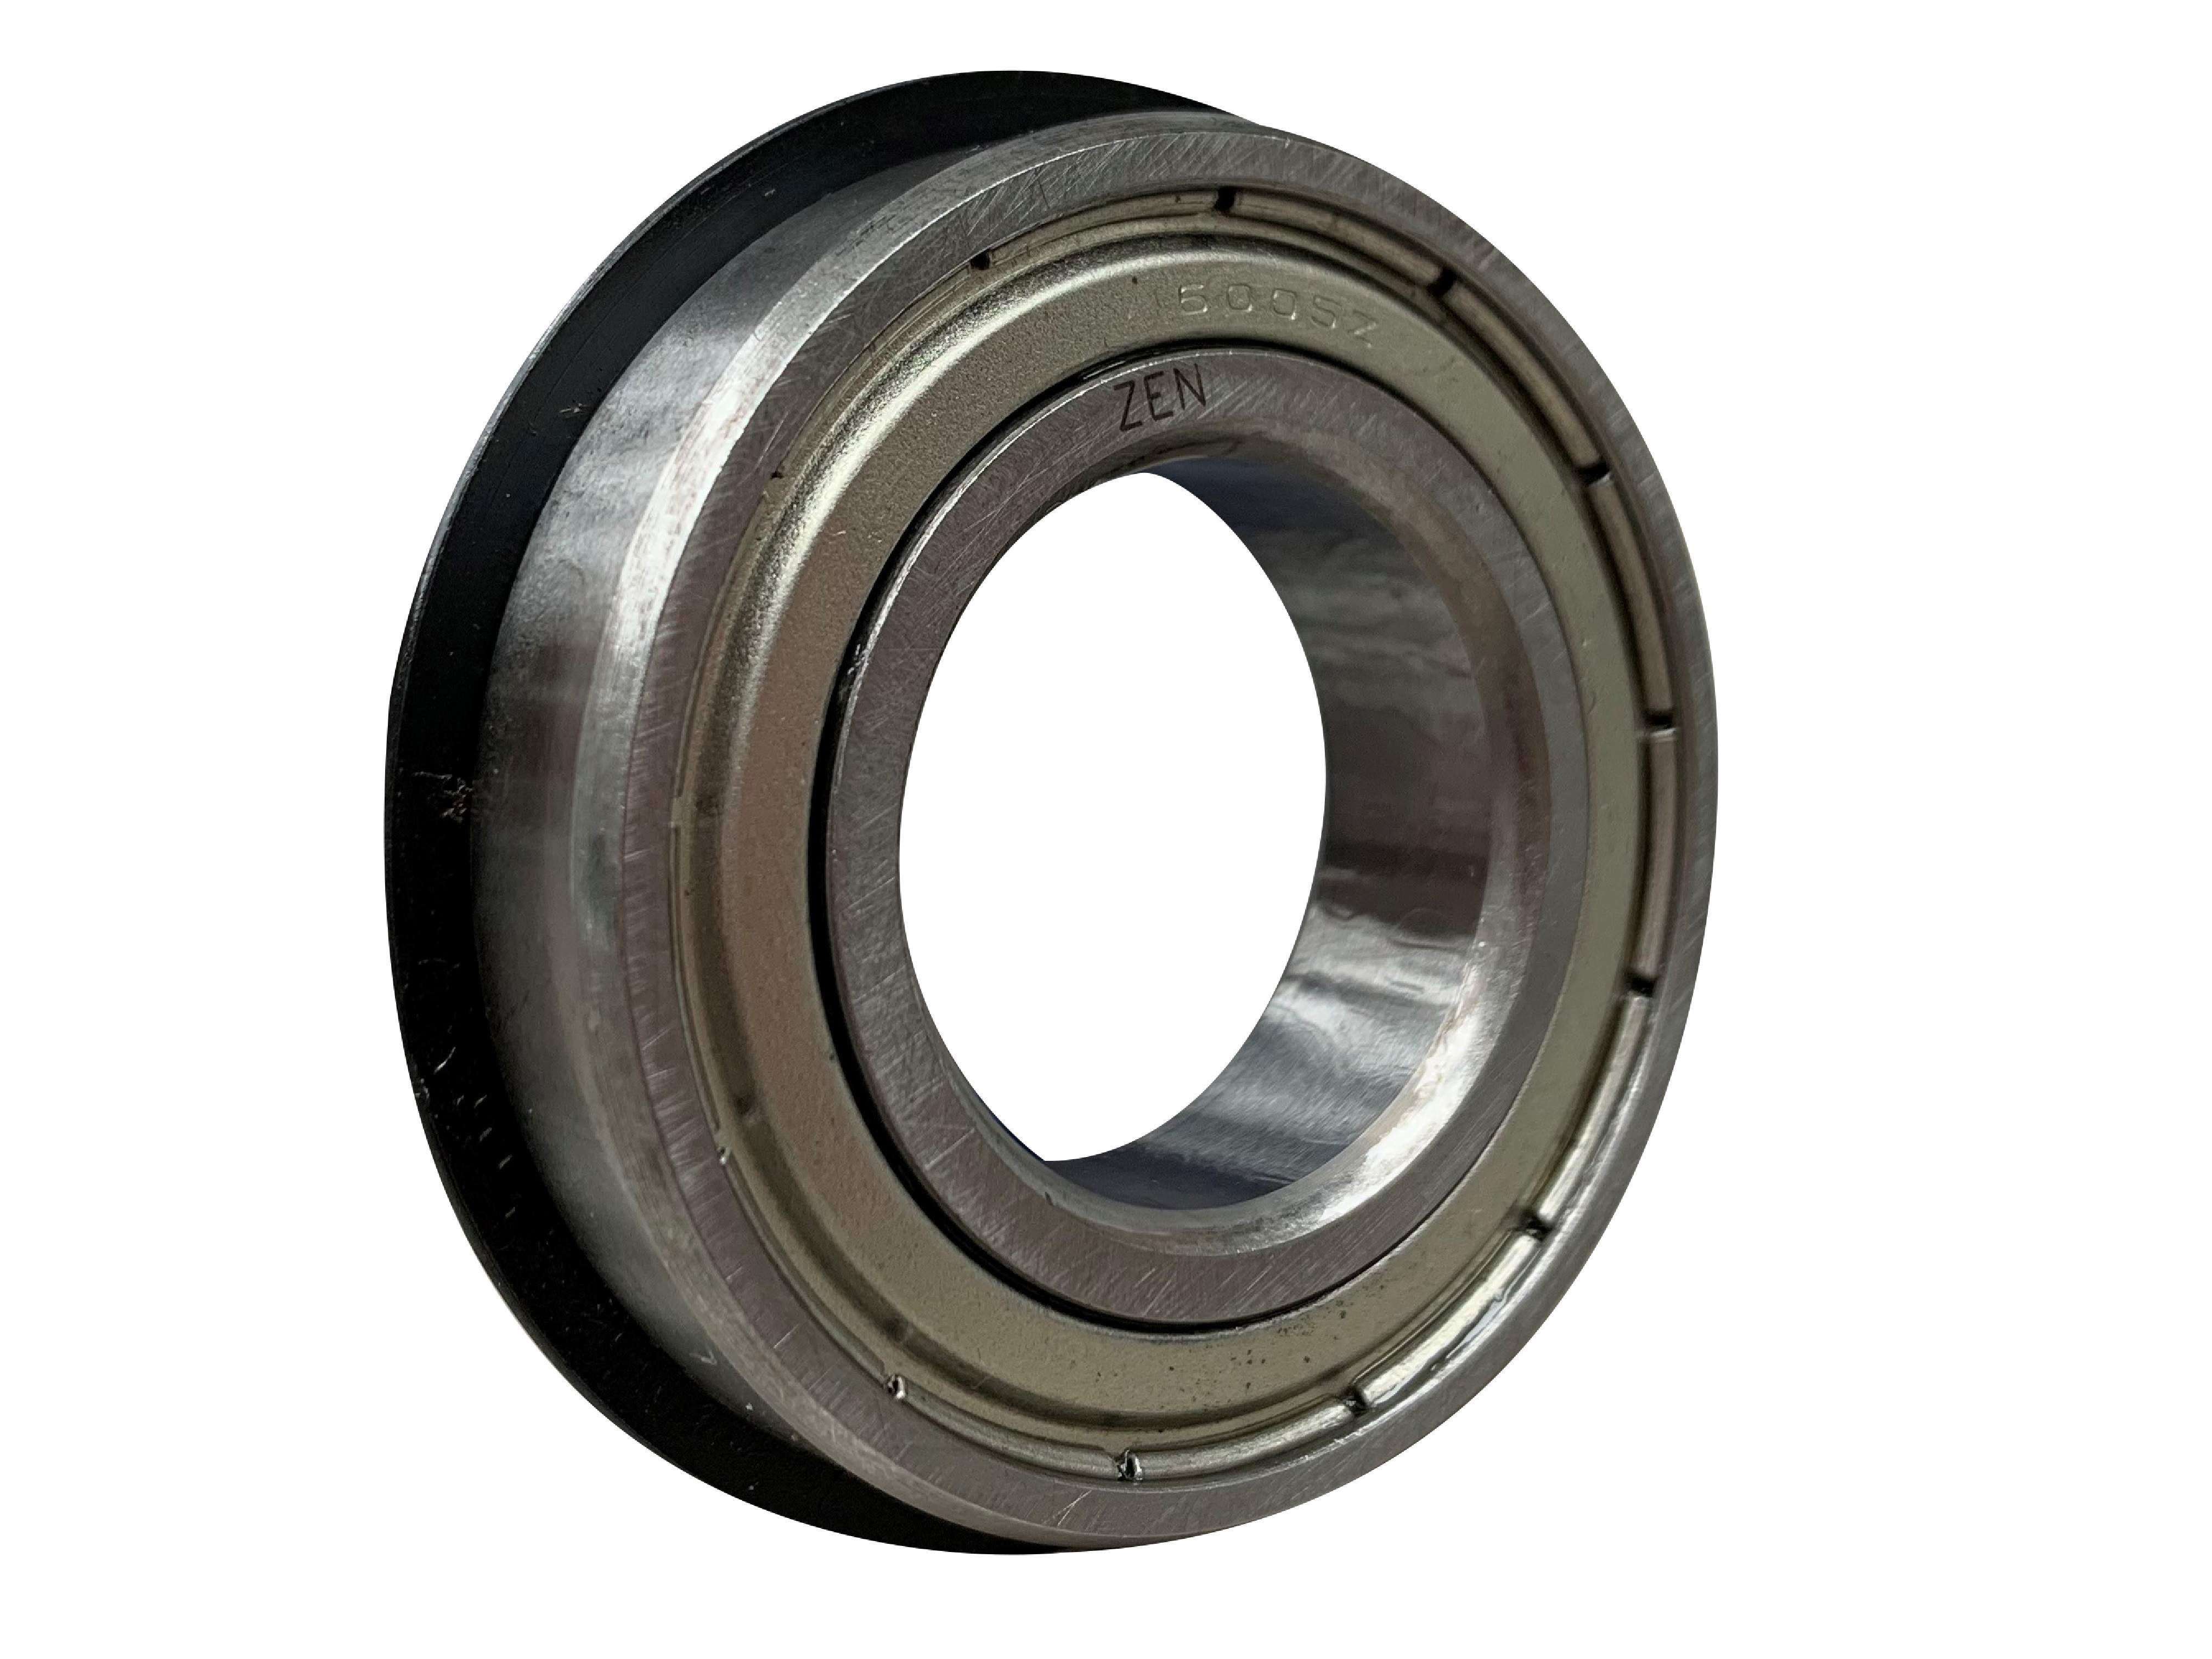 ZEN 6000-2Z-NR Shielded Ball Bearing With Snap Ring 10mm x 26mm x 8mm